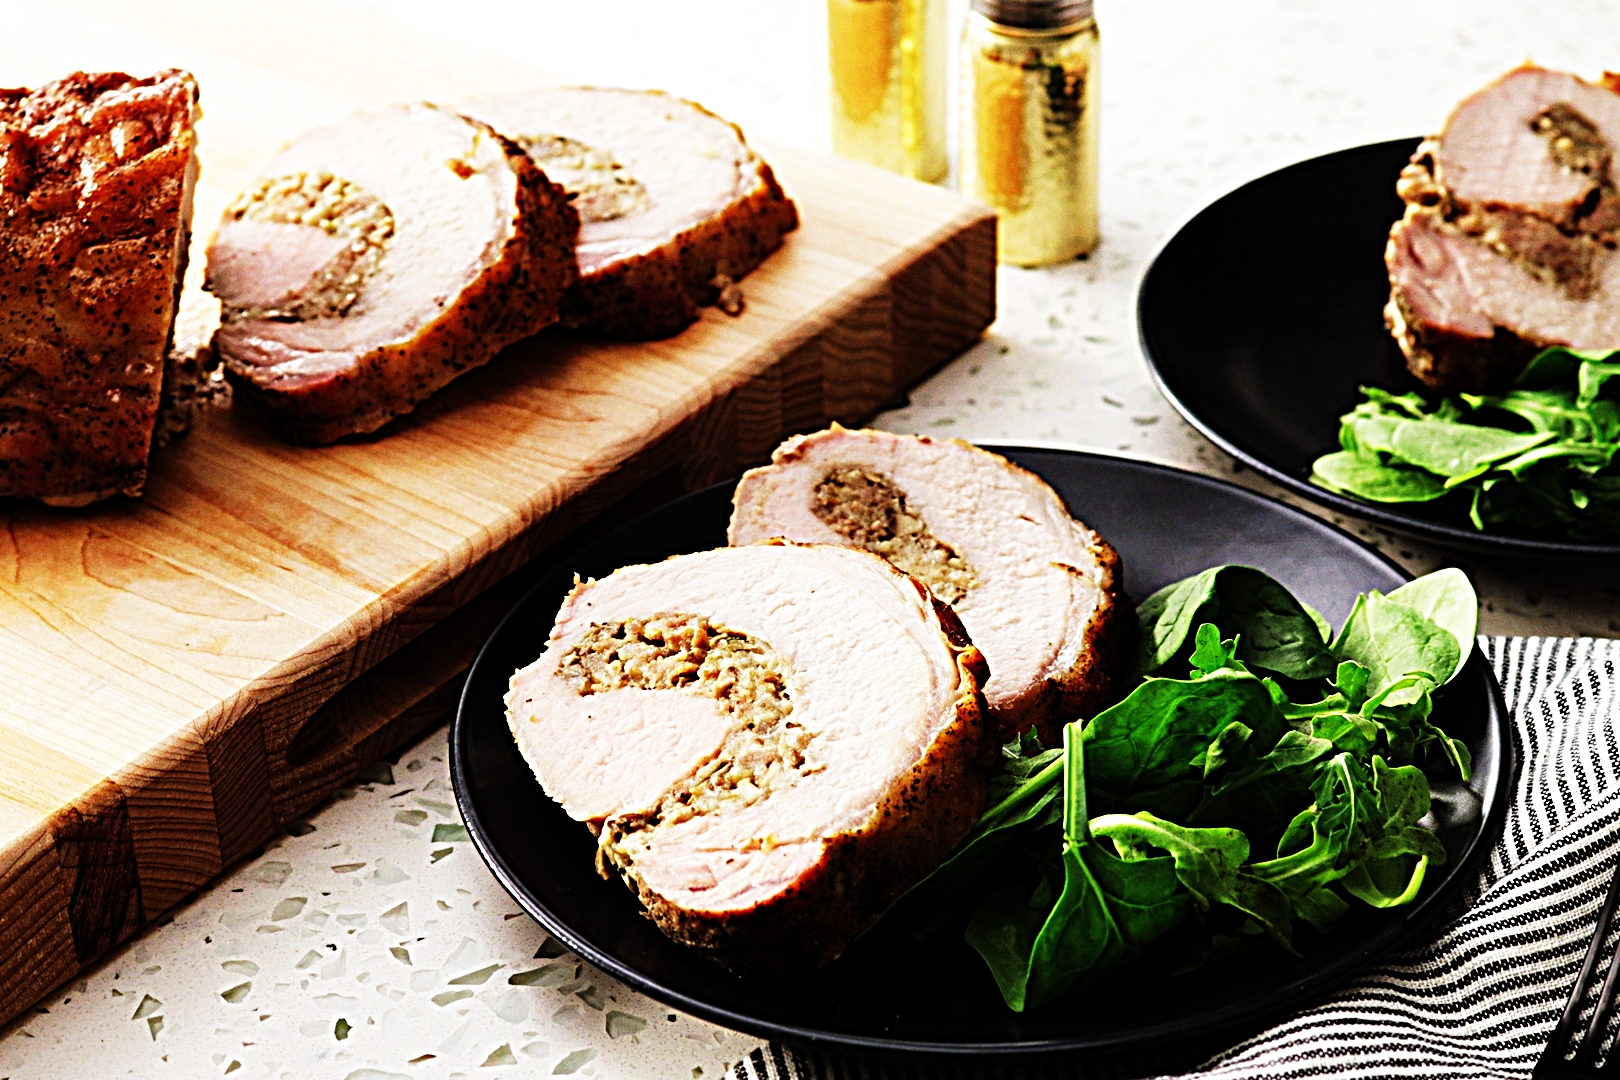 Stupid-Easy Recipe for Sausage and Cheese Stuffed Pork Loin (#1 Top-Rated)